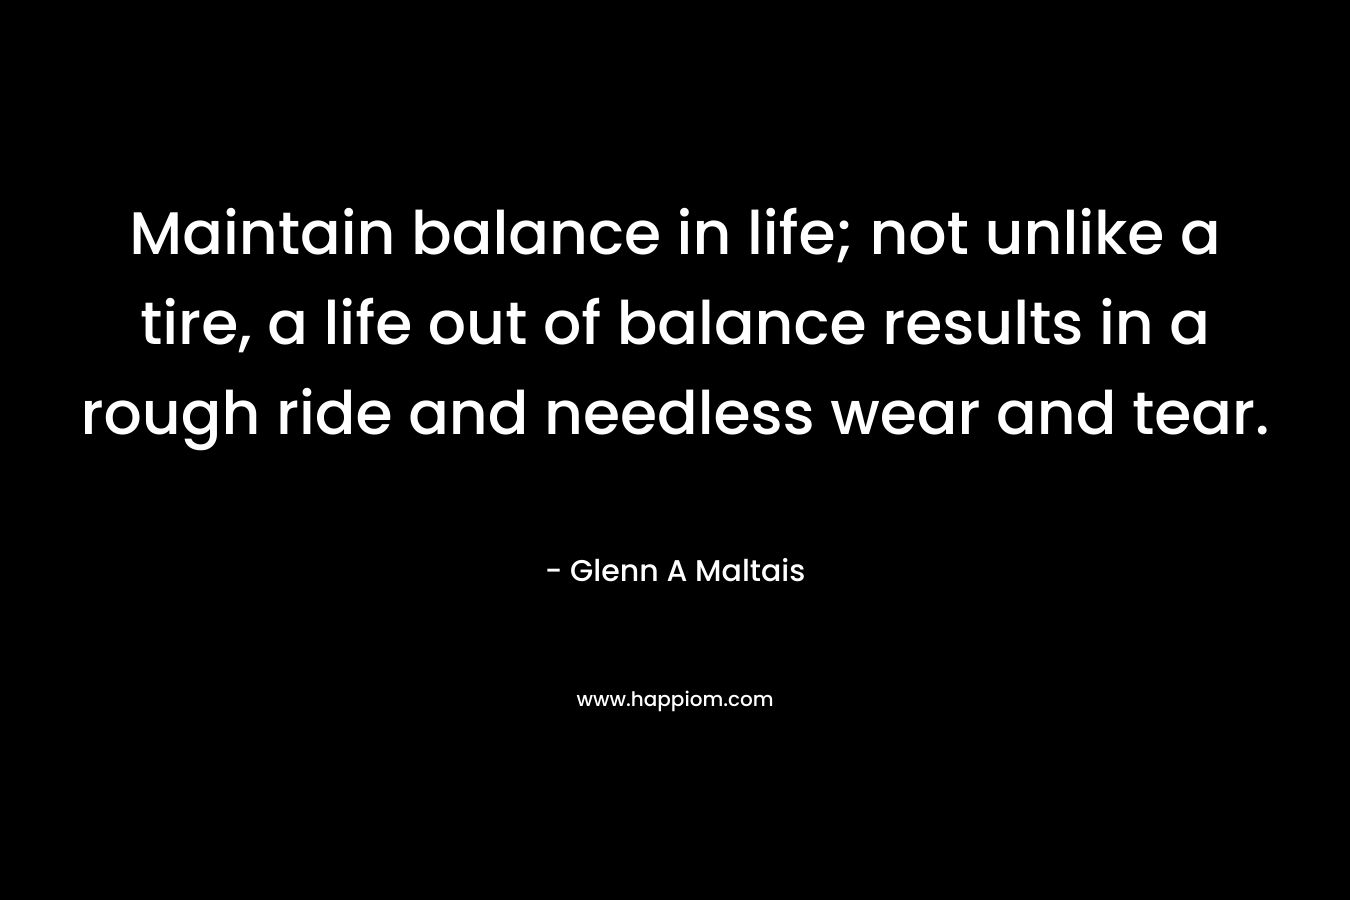 Maintain balance in life; not unlike a tire, a life out of balance results in a rough ride and needless wear and tear.